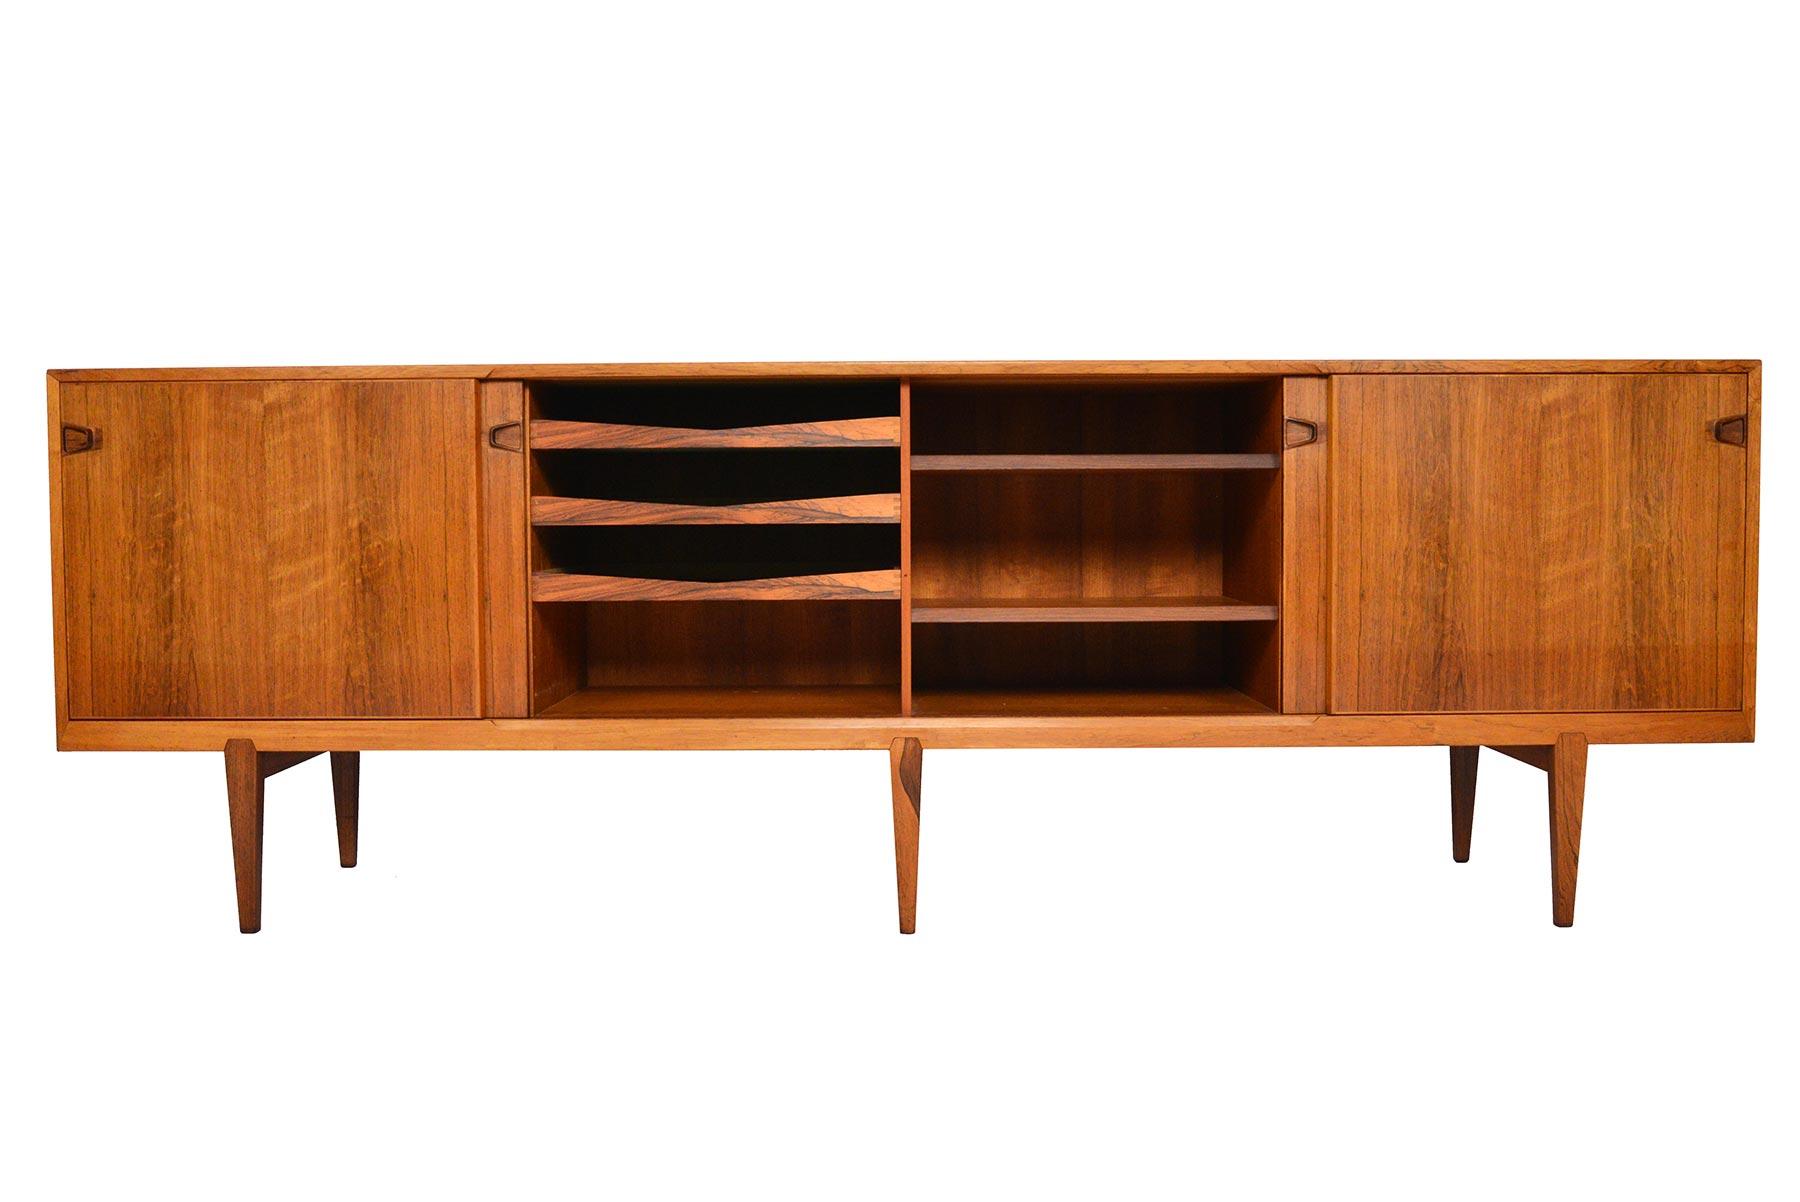 This gorgeous credenza was designed by Henry Rosengren Hansen for Brande Møbelindustri in 1950. Minimalist details and expert craftsmanship showcase dramatic bookmatched Brazilian rosewood grain. Four sliding doors open to four bays outfitted with